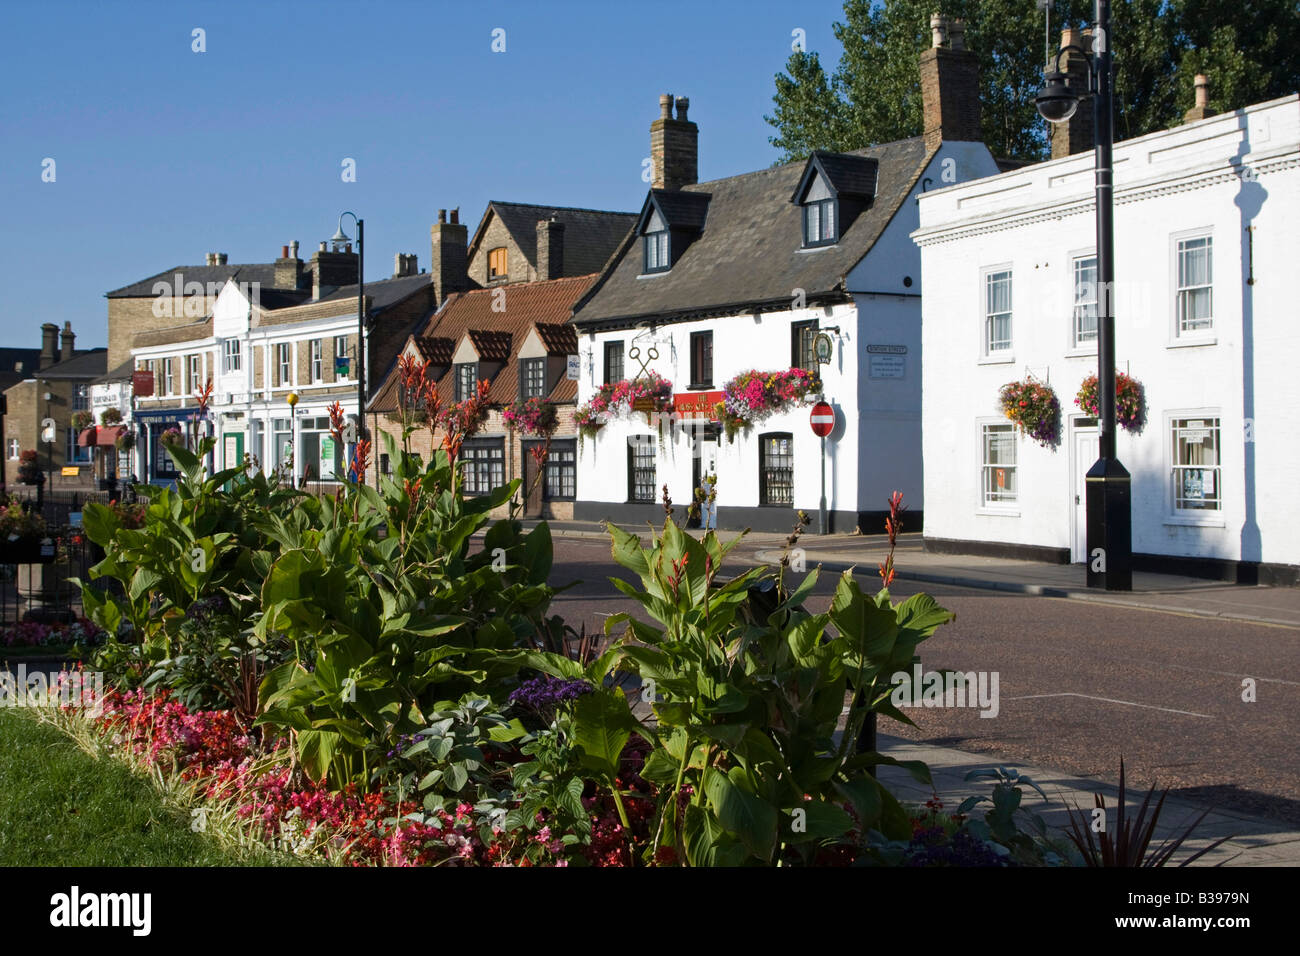 Chatteris is one of four market towns in the Fenland district of Cambridgeshire, situated in The Fens. Stock Photo